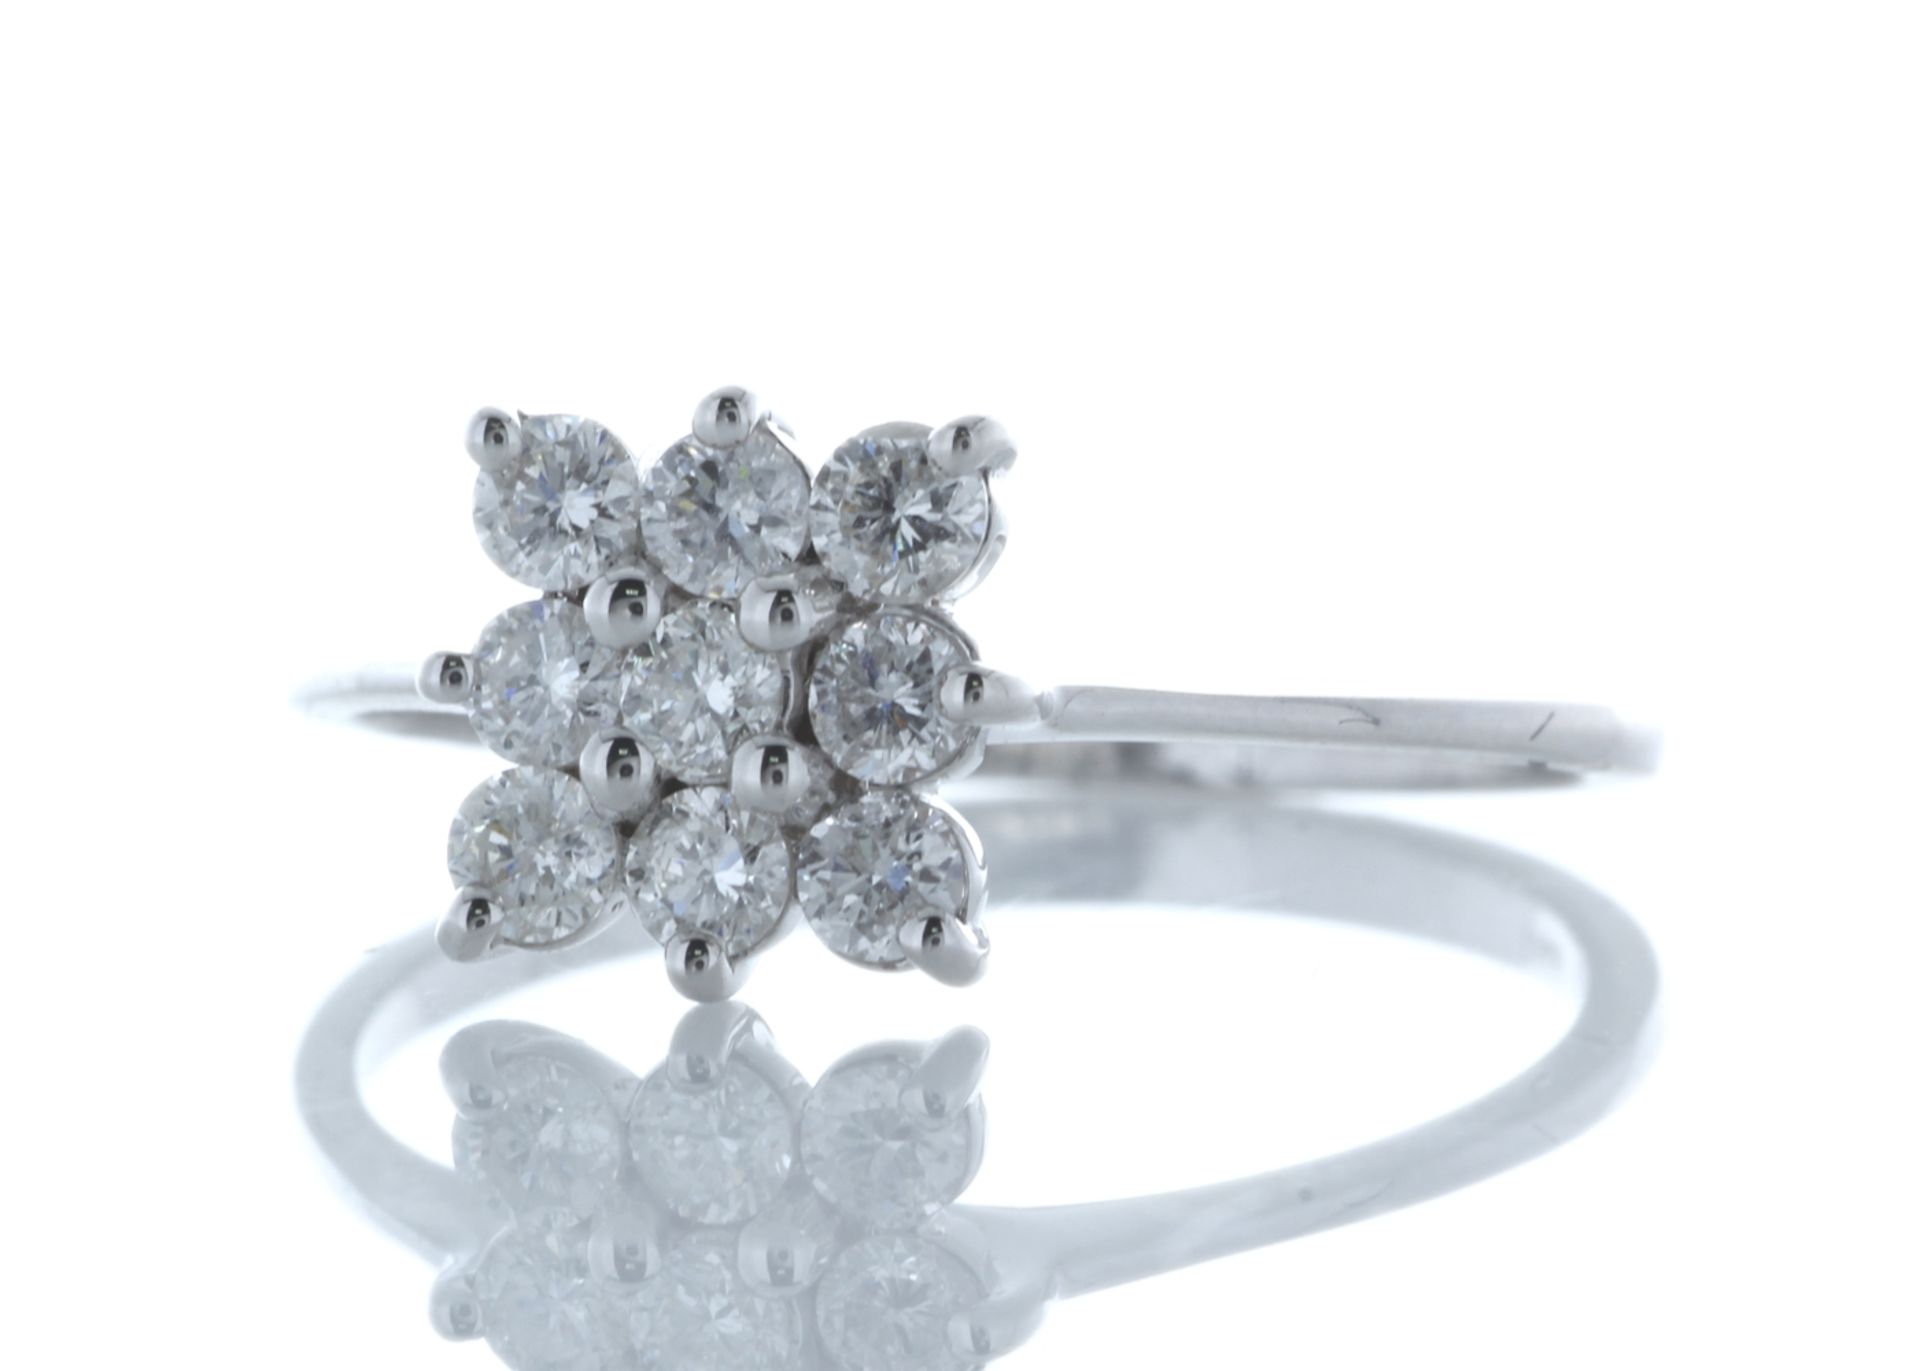 18ct White Gold Fancy Cluster Diamond Ring 0.45 Carats - Valued by GIE £6,295.00 - This ring - Image 2 of 5